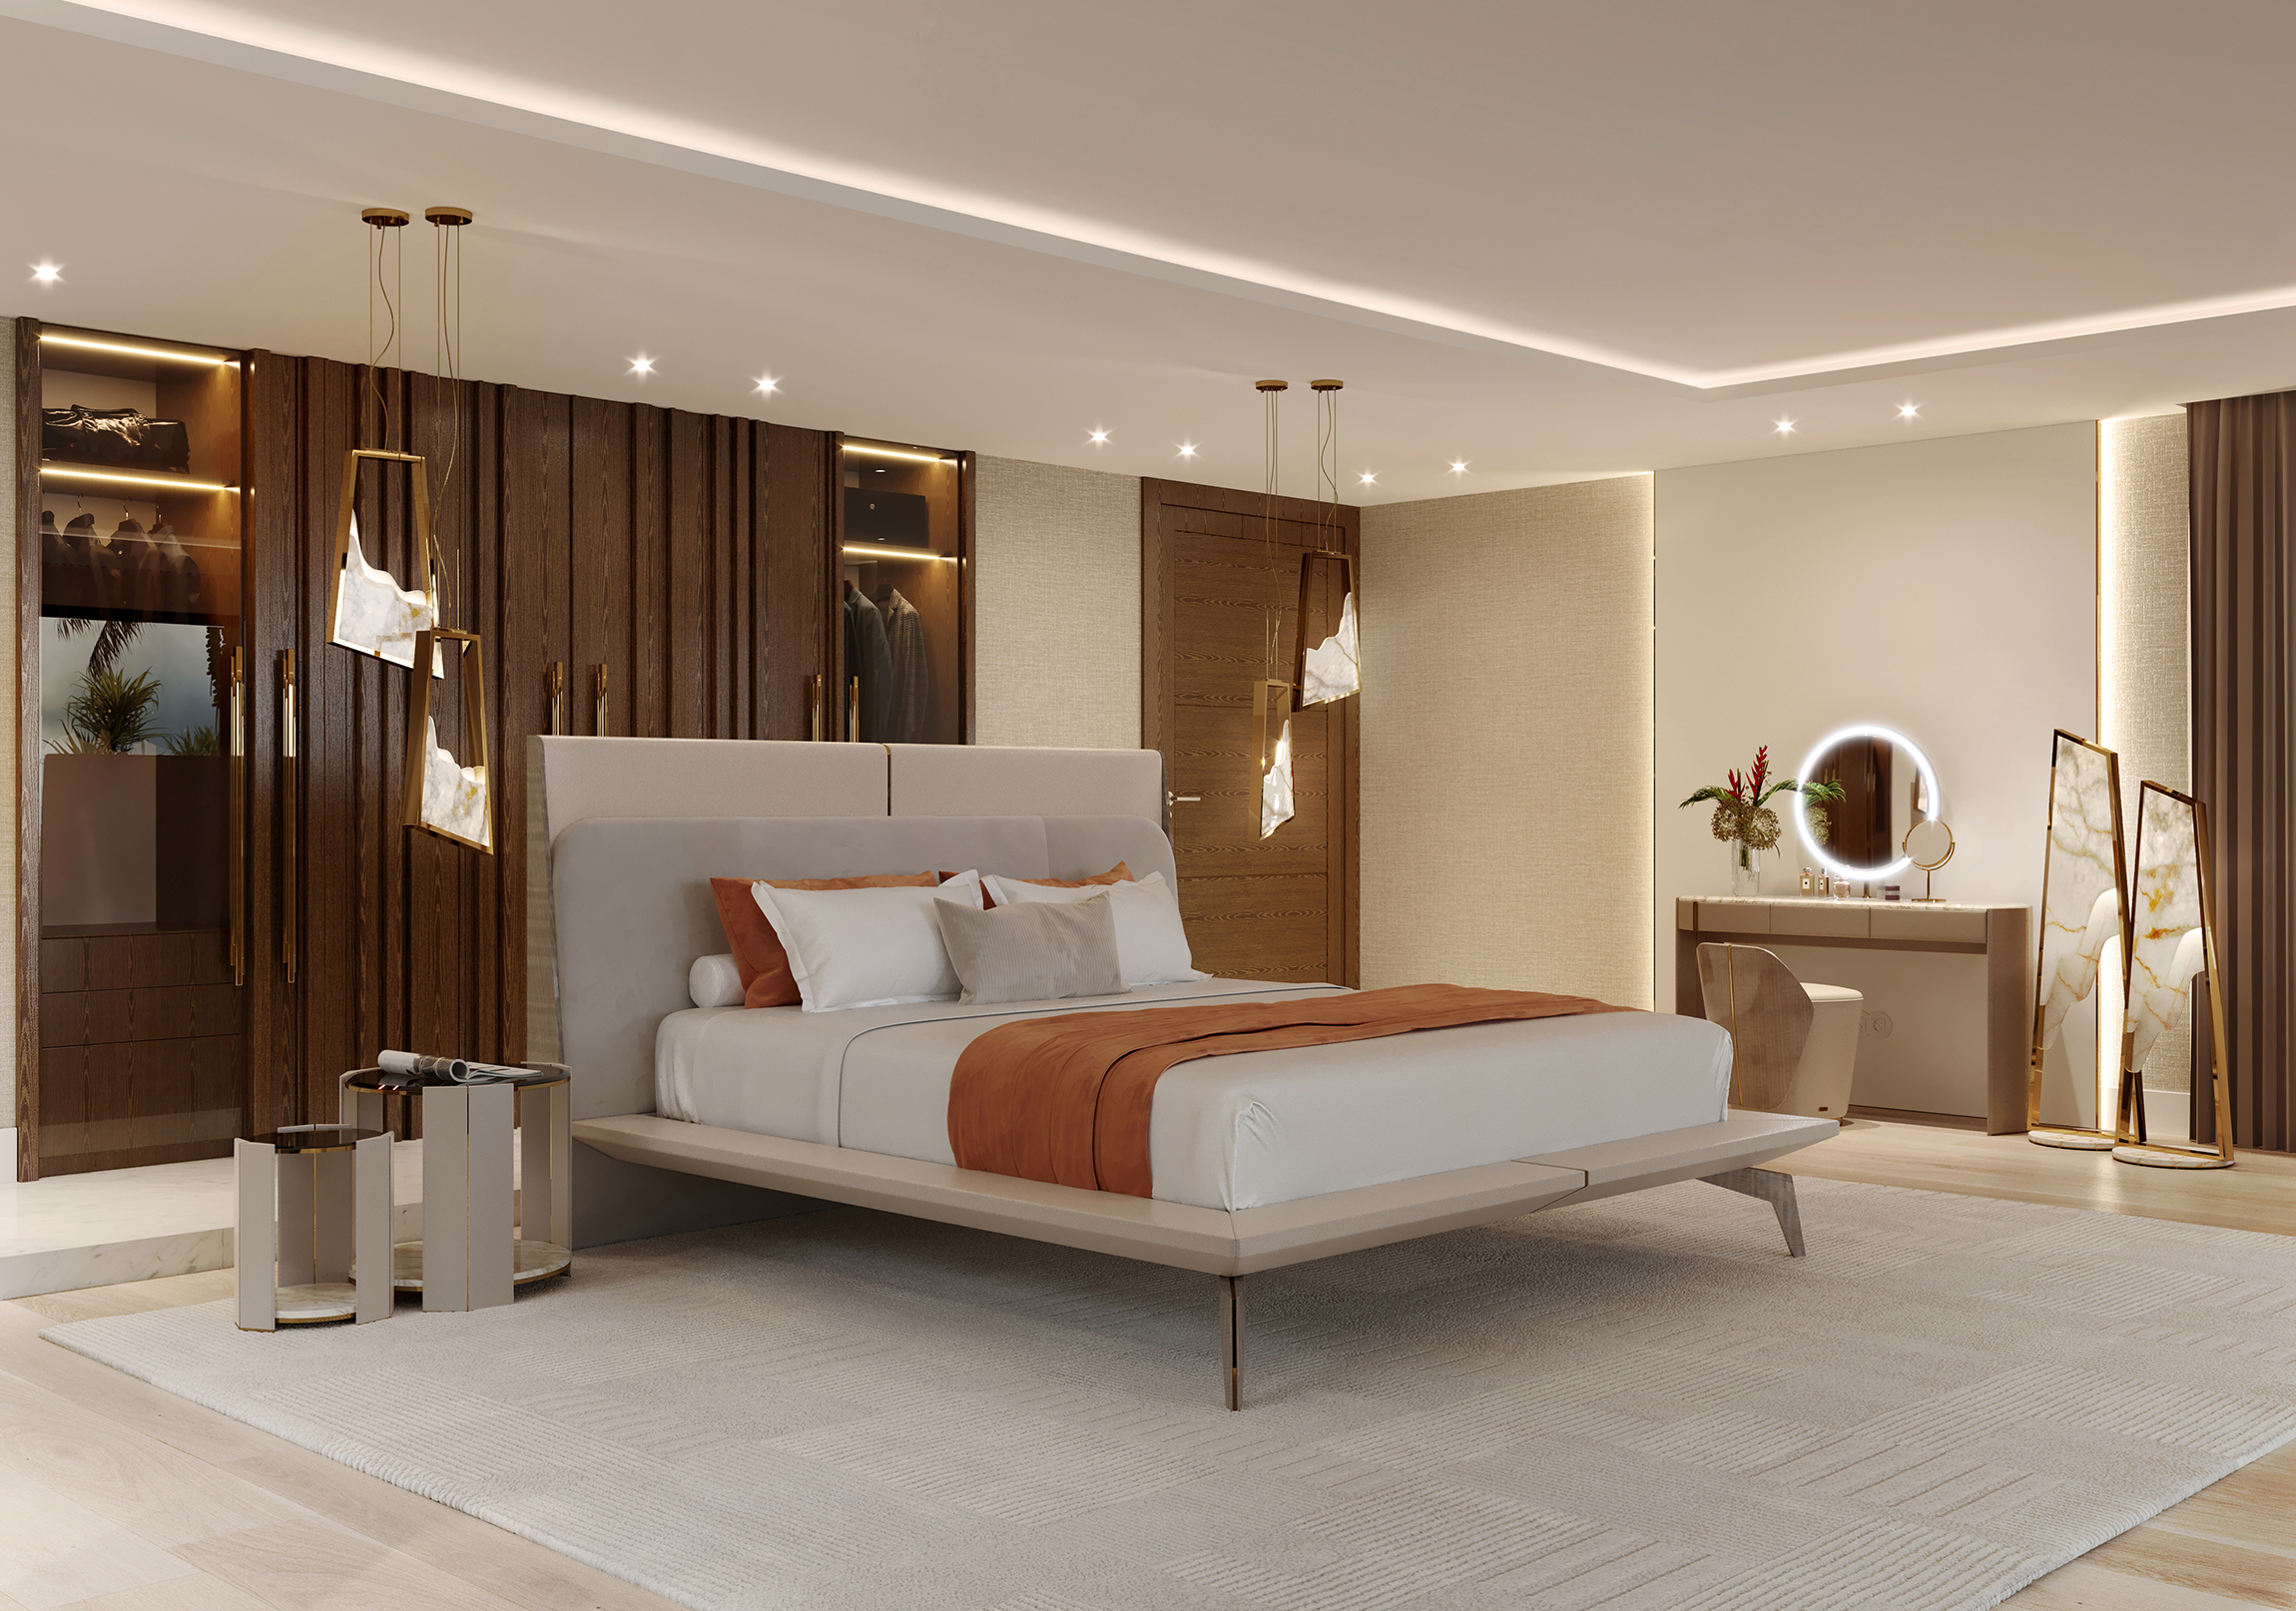 Inspiring Bedrooms: Luxury Furniture To Decor Your Home